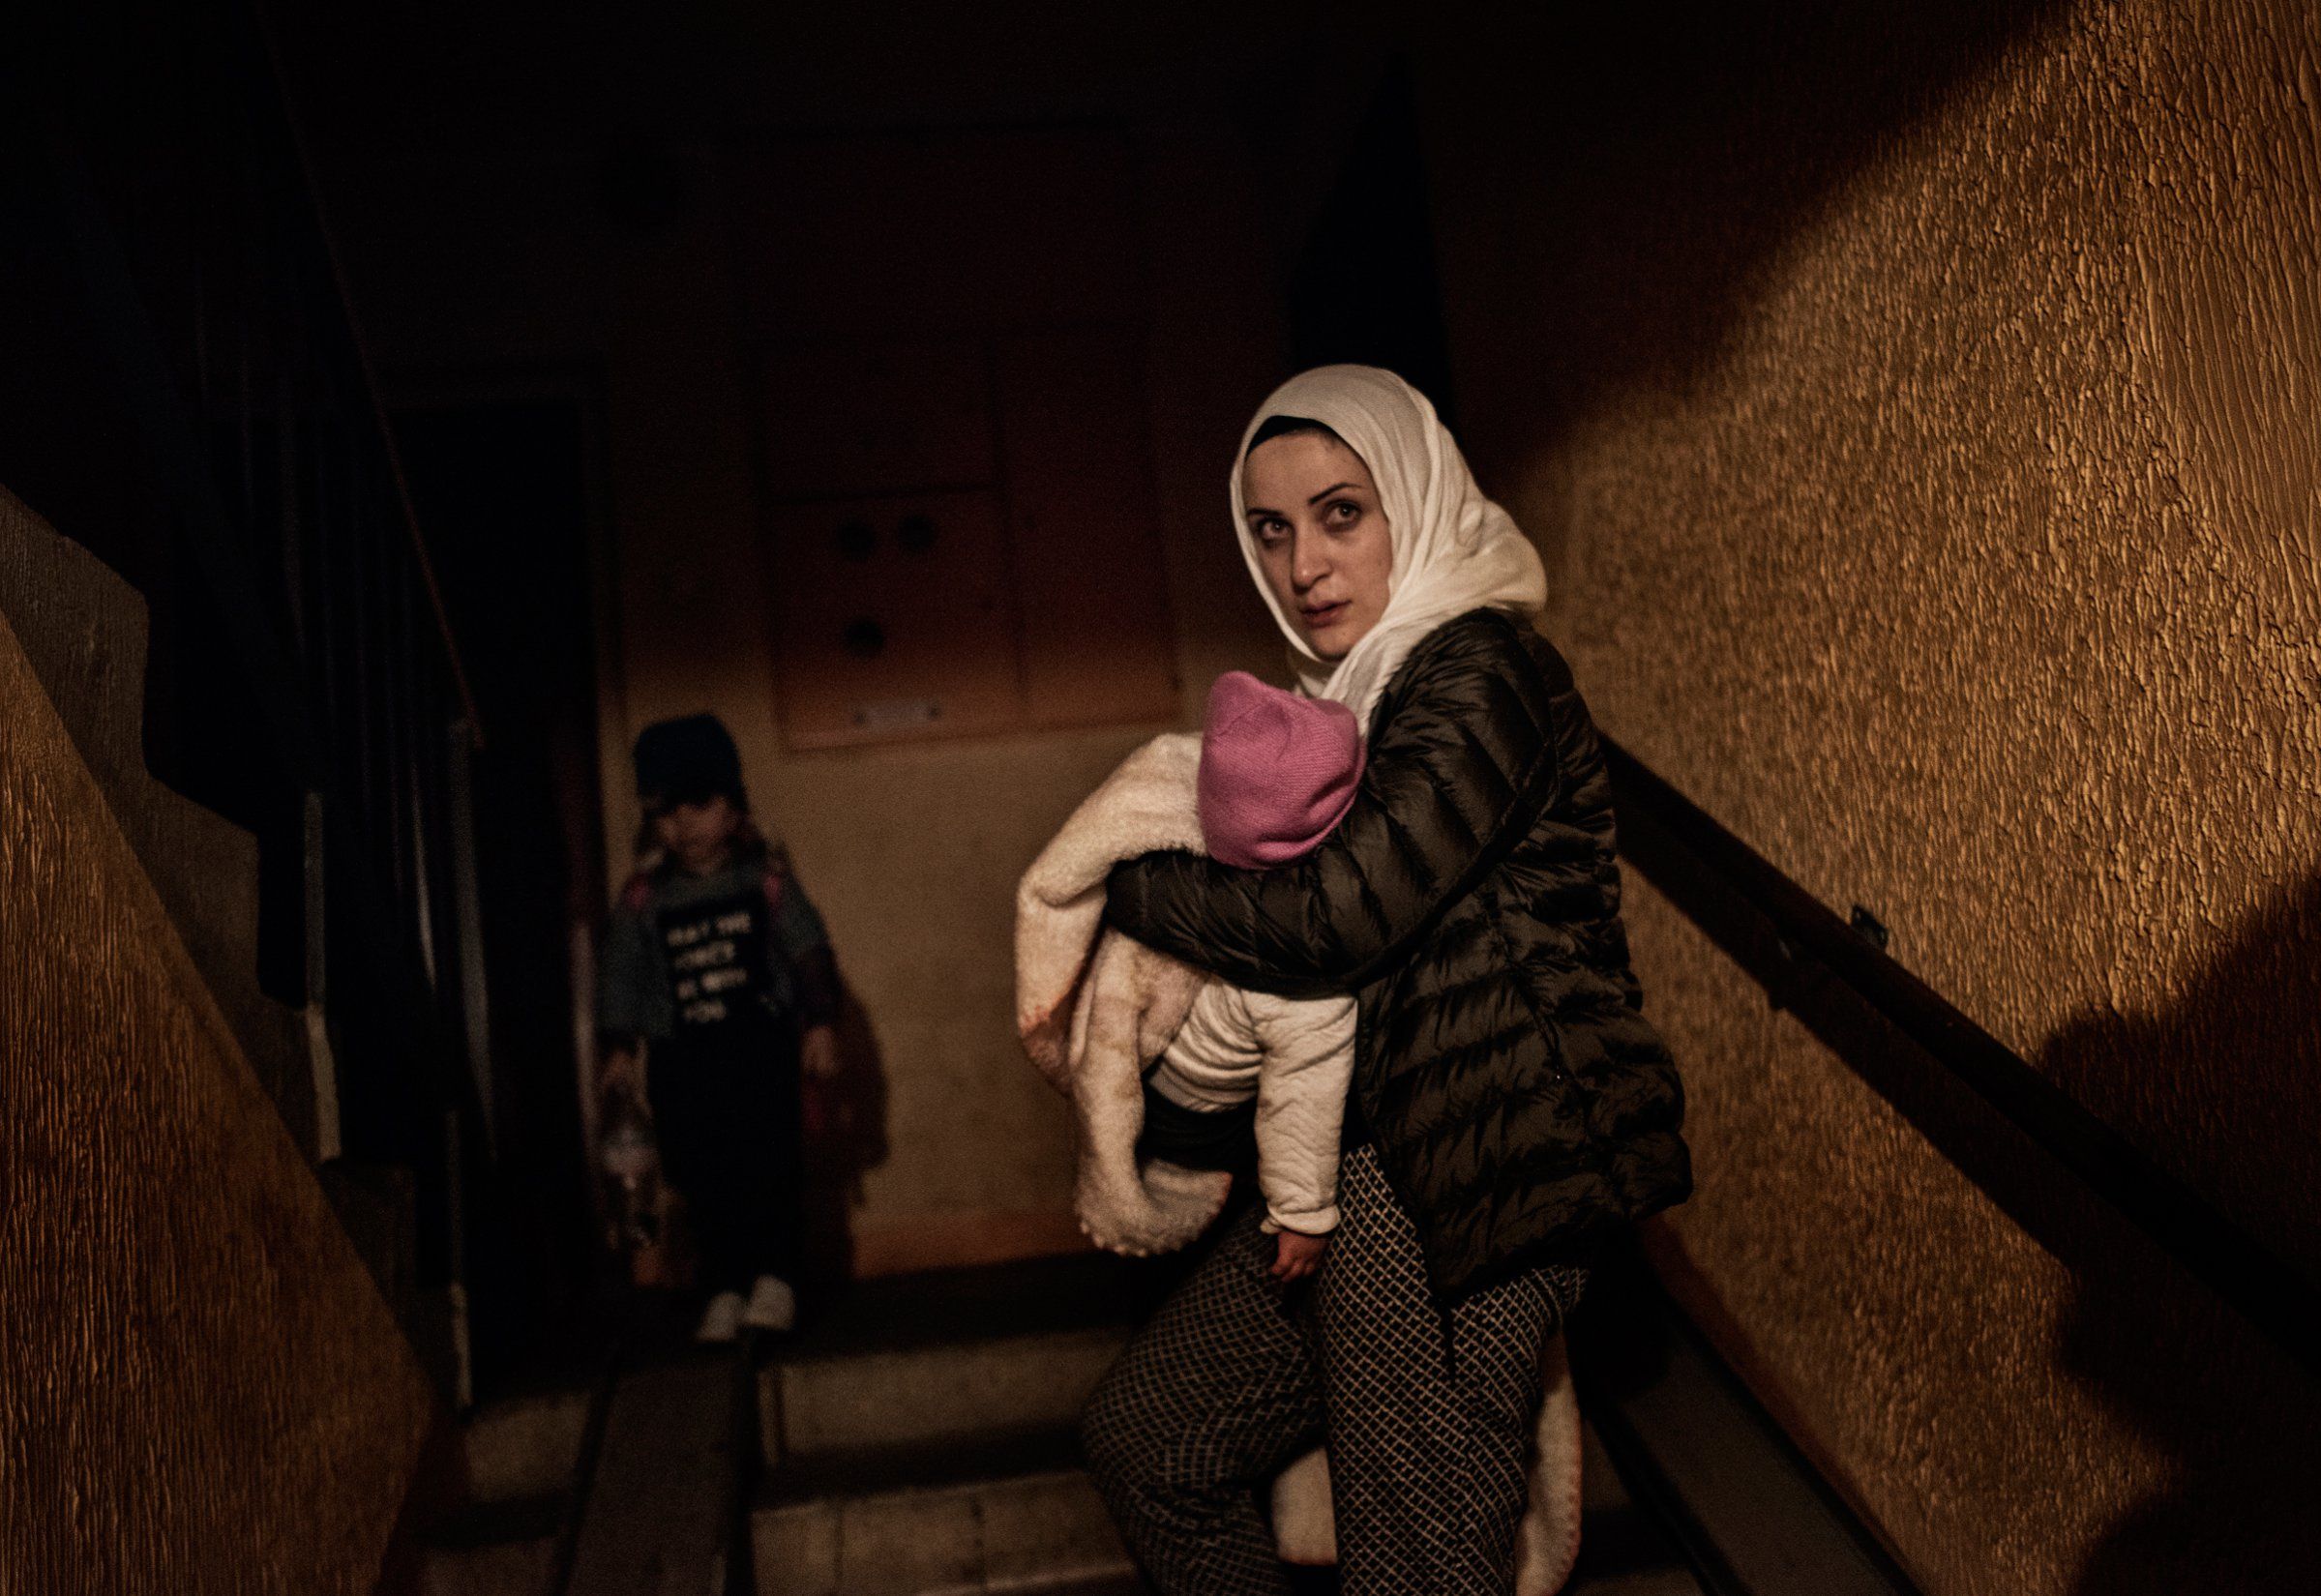 Syrian refugee Taimaa Abzali weeps as she holds baby Heln and enters her new apartment building after a long, grueling day of travel and upheaval once again from Athens to their new home in Polva, Estonia. Image by Lynsey Addario. Estonia, 2017. 